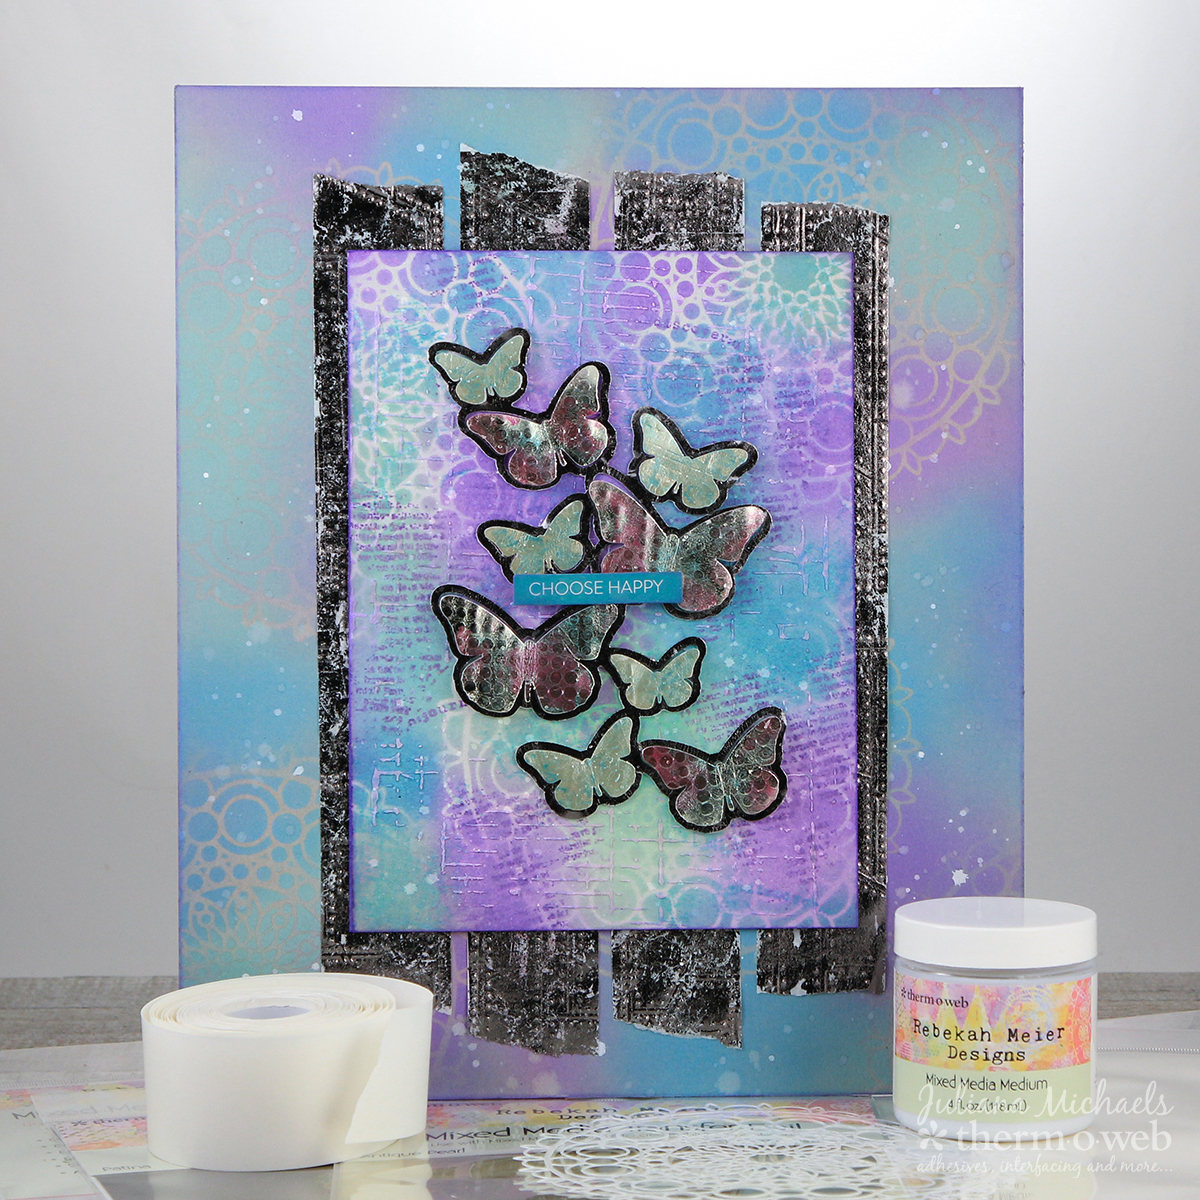 Choose Happy Mixed Media Canvas by Juliana Michaels featuring Therm O Web Rebekah Meier Mixed Media Products